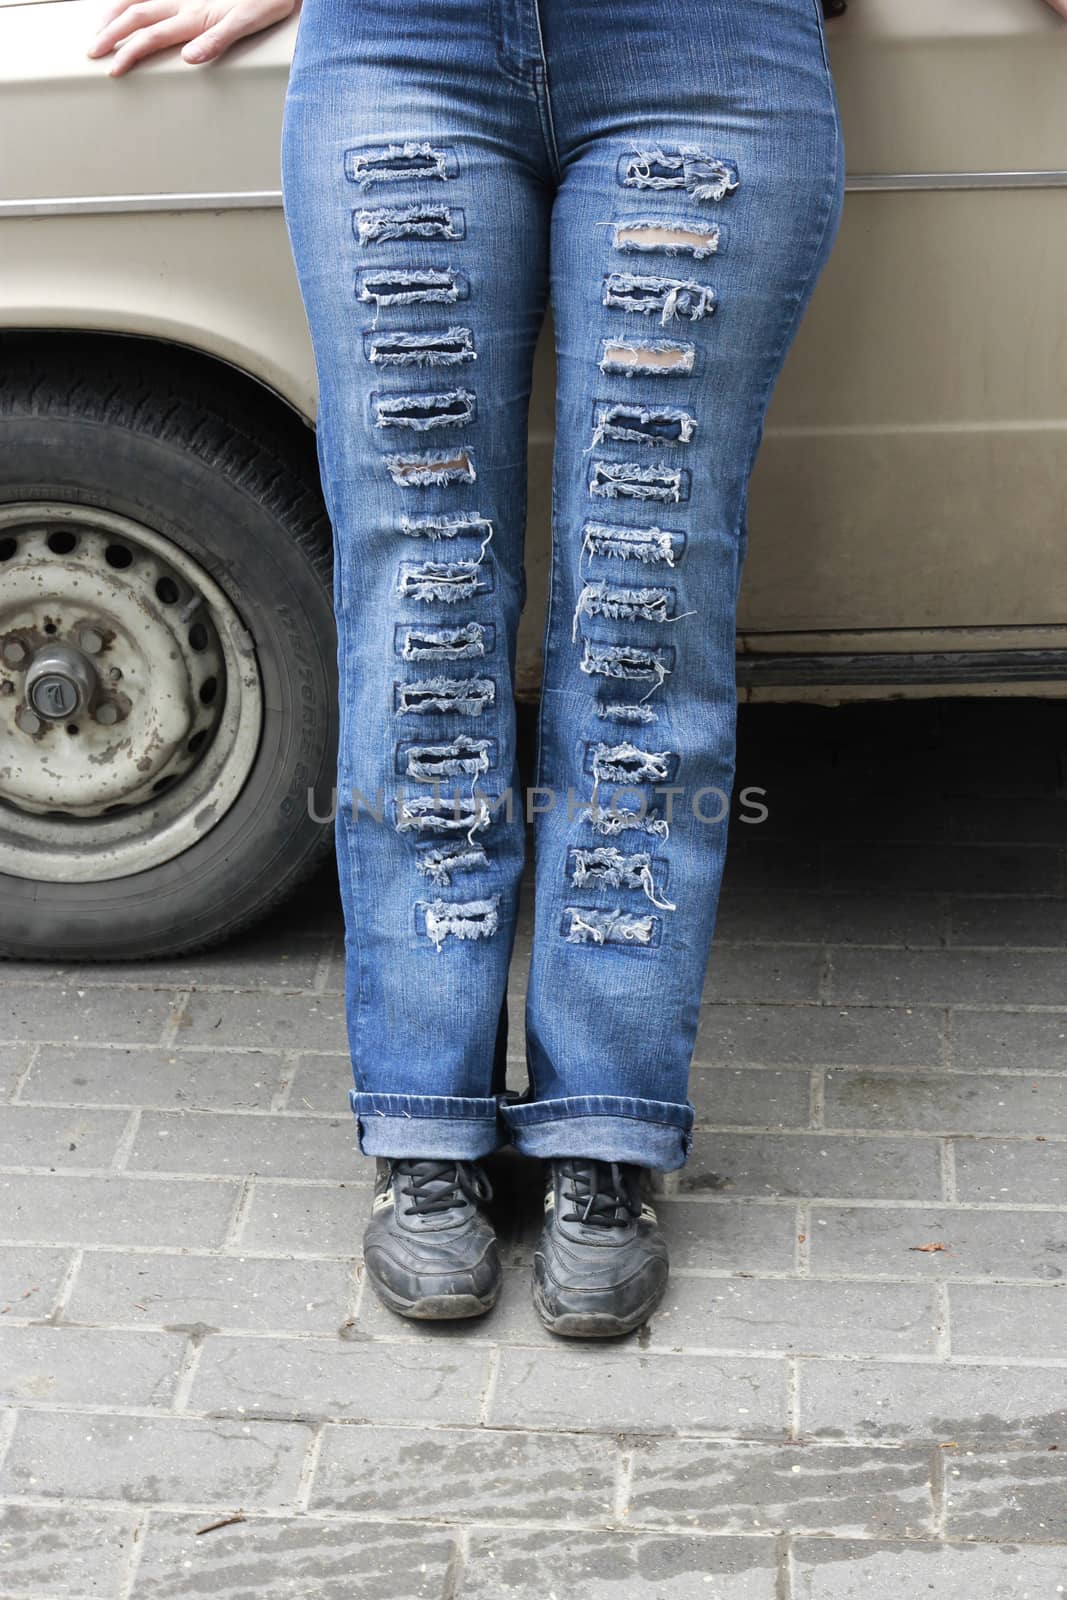 Woman in blue grunge jeans standing near auto